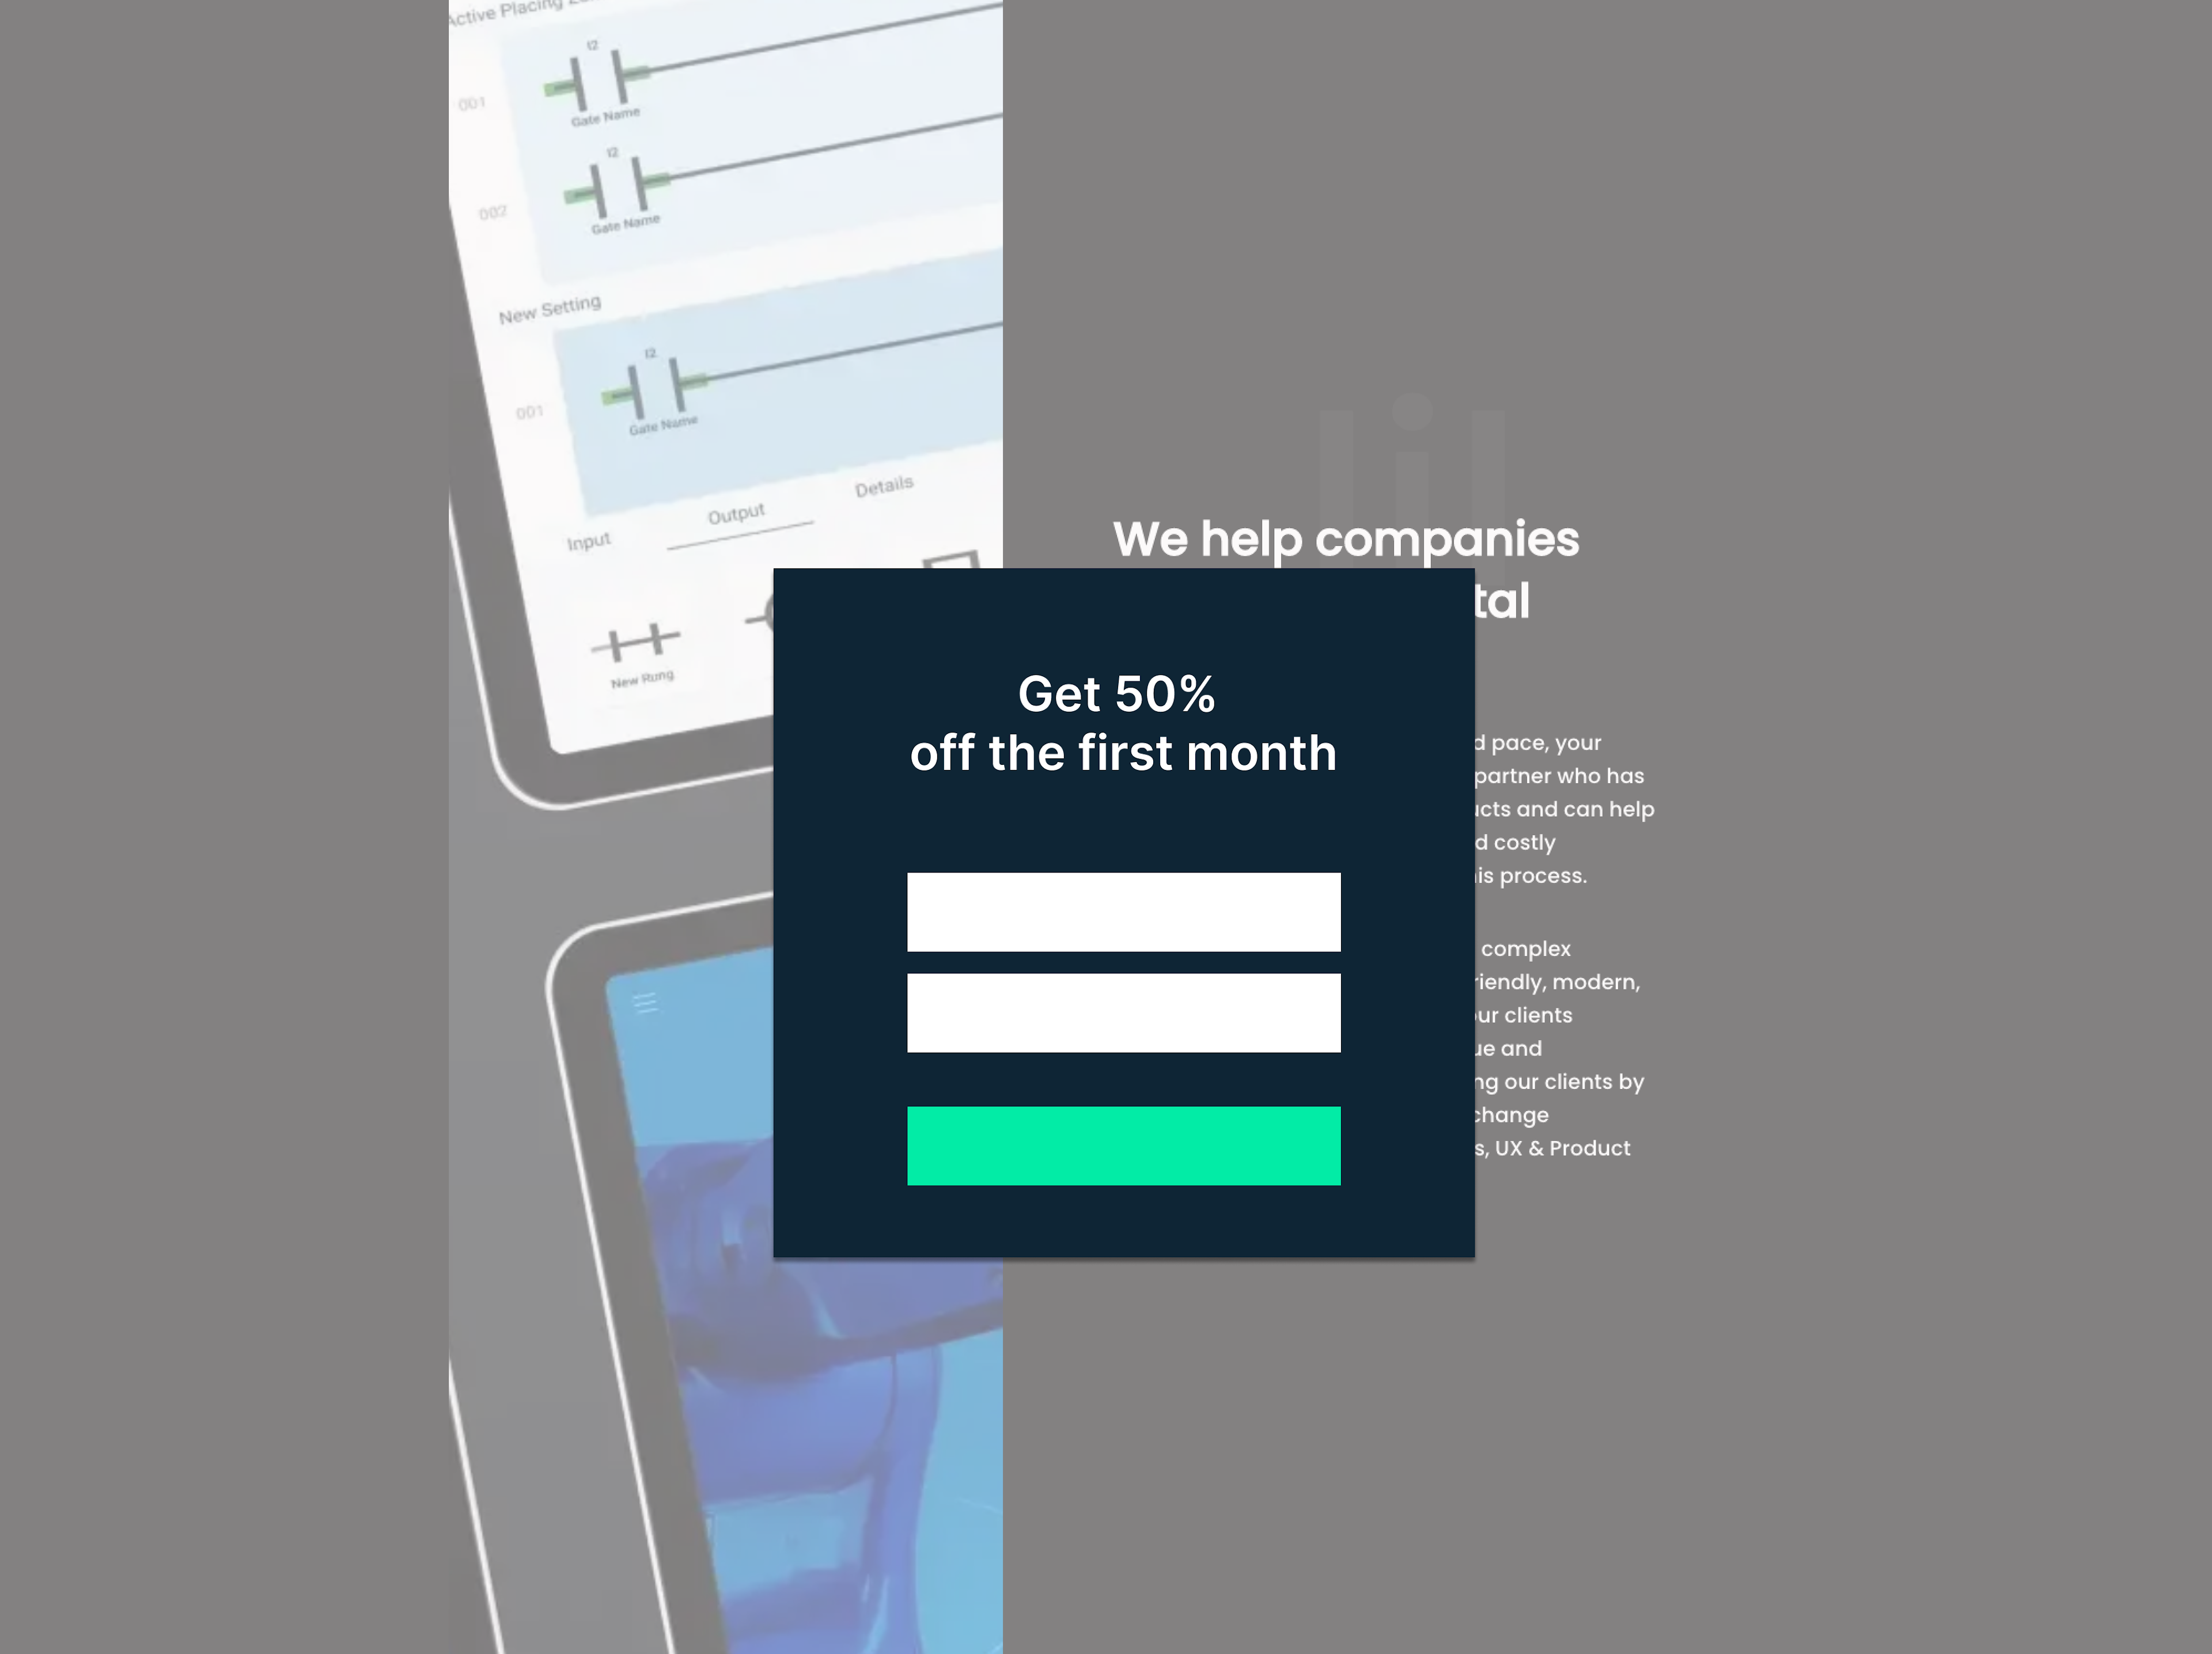 Improving conversion rates by up to 10x for popup forms on your website